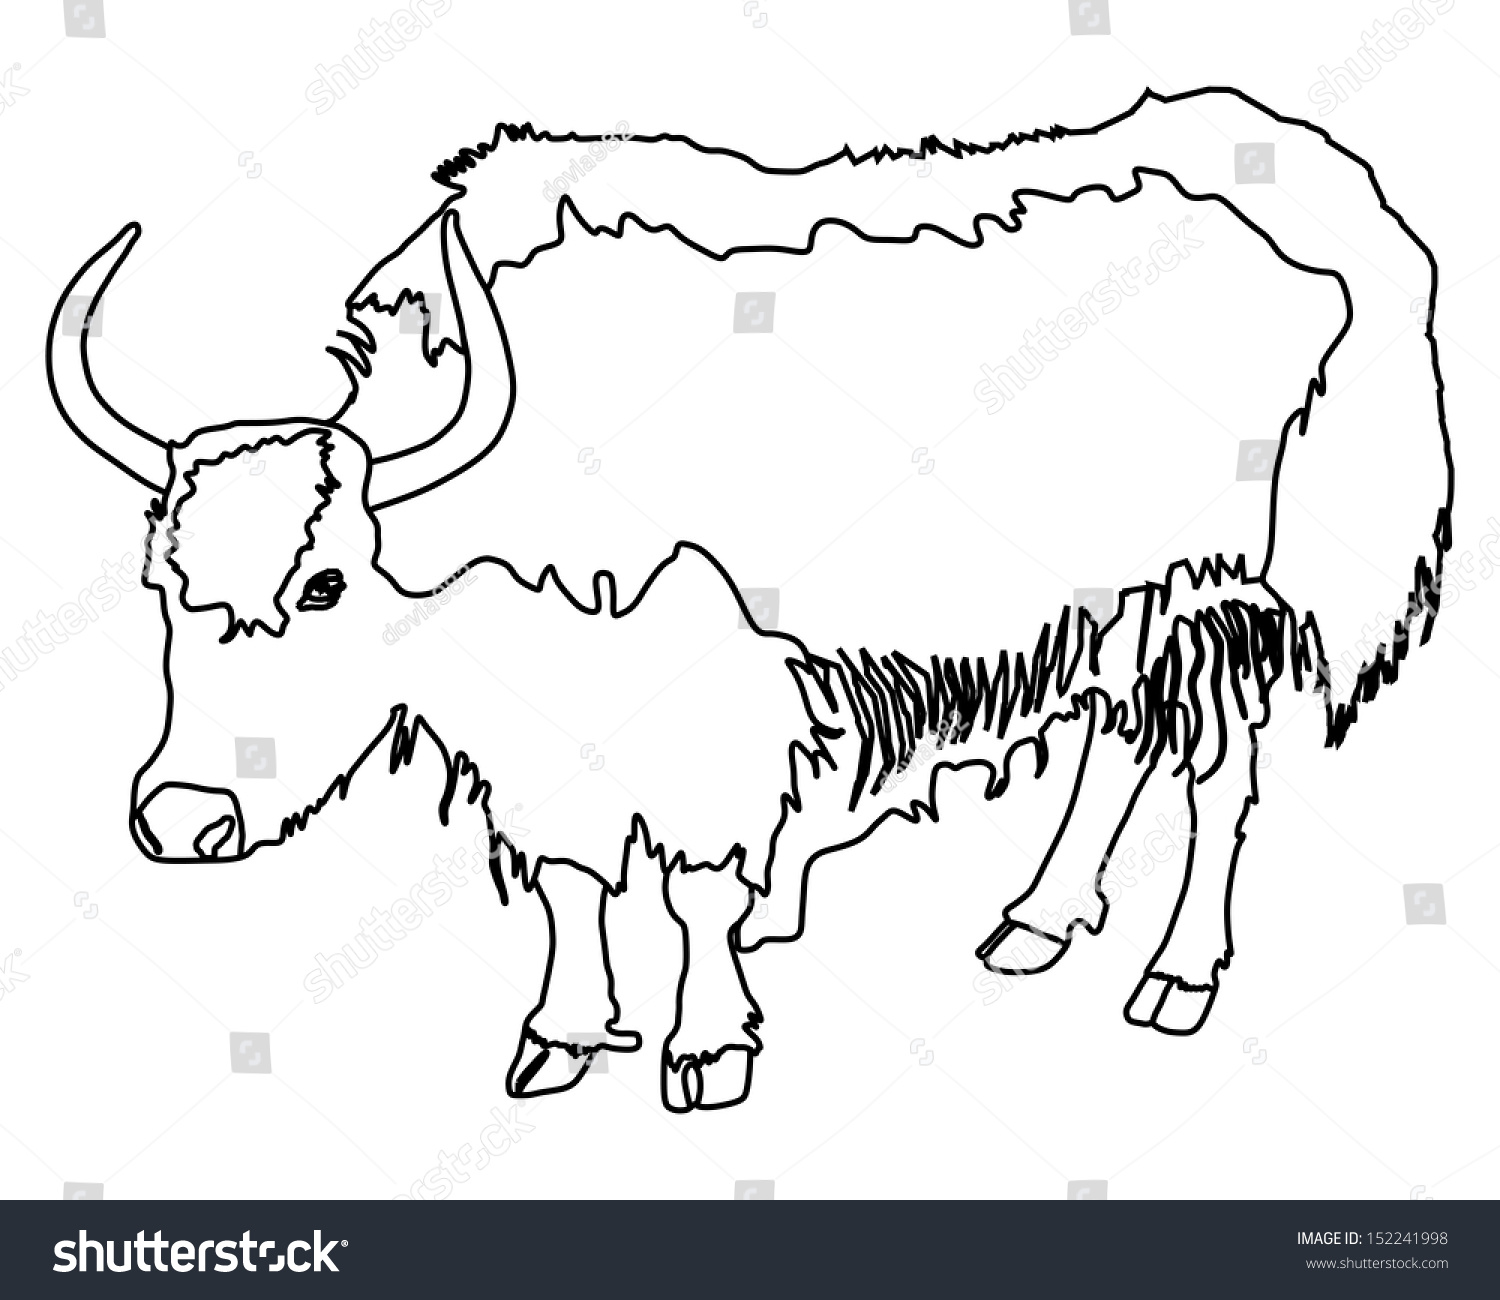 Himalayan Yak Isolated On White Background Stock Vector (Royalty Free ...